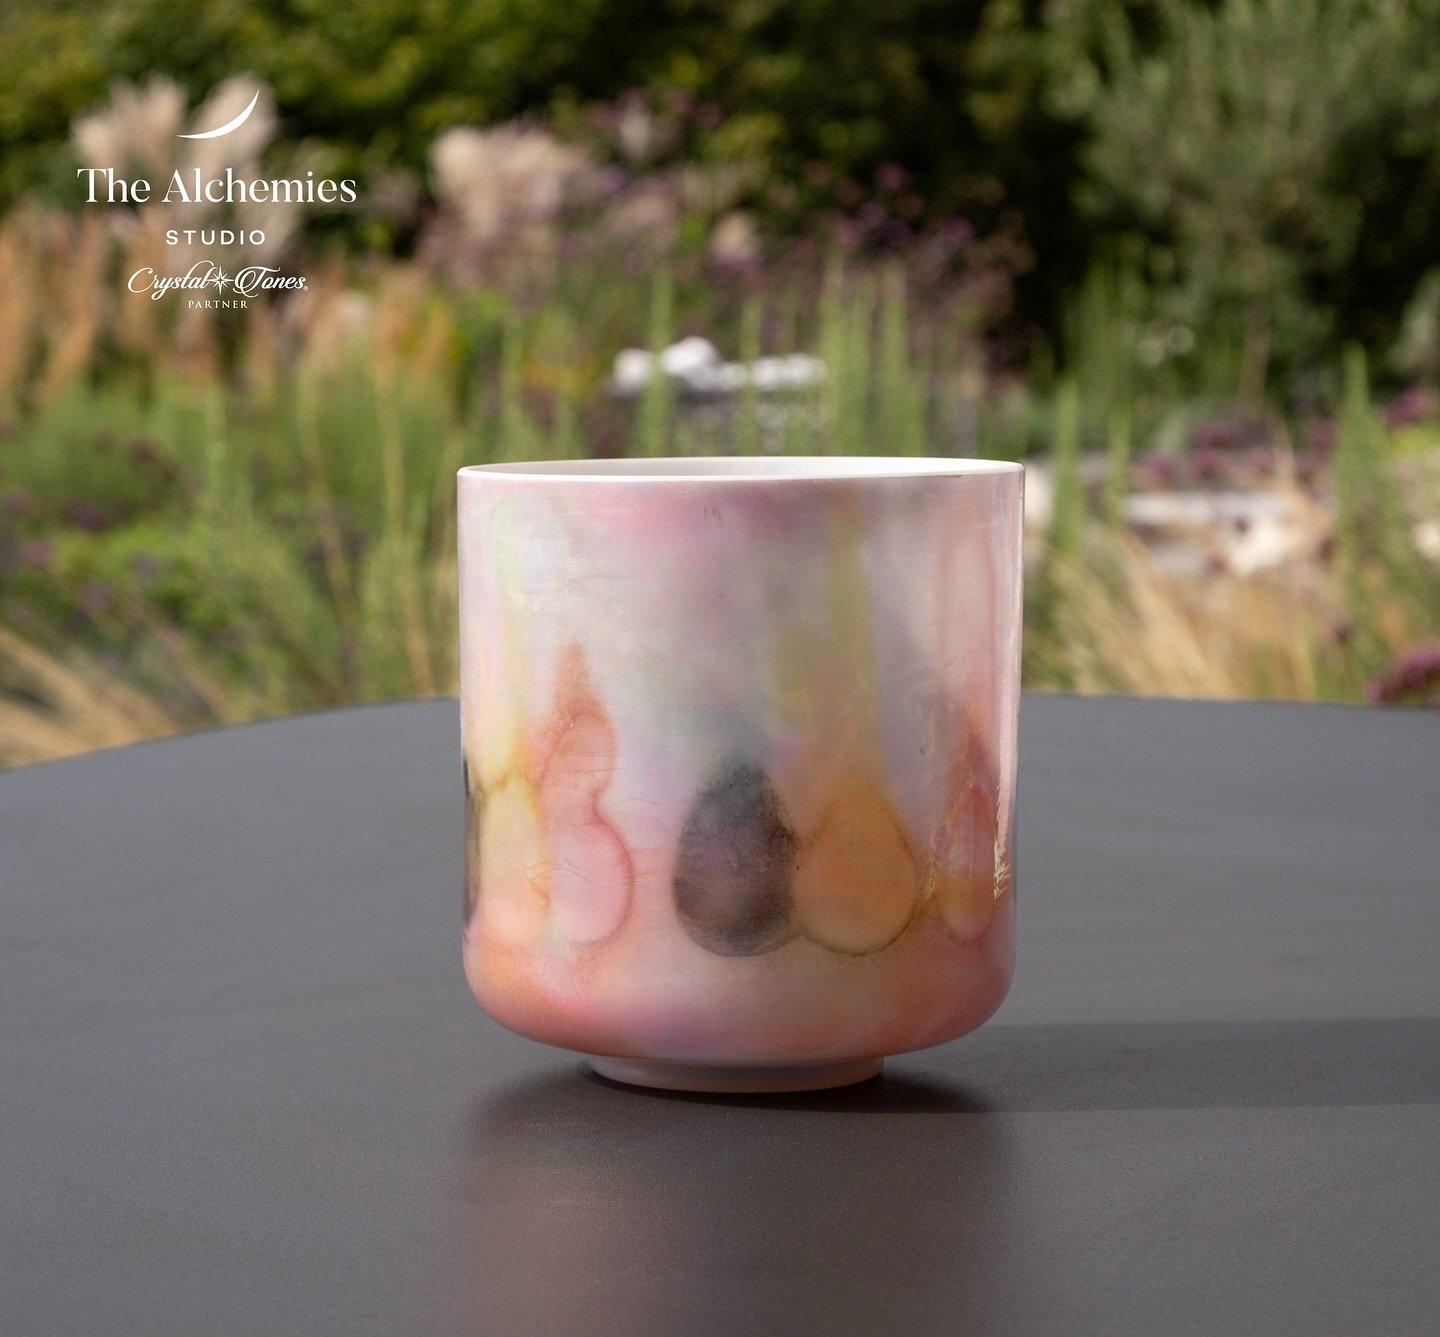 Divine St. Germain Sky Crystal Tones&reg; Quartz Singing Bowl

Signature: Accessing Truth

Alchemical Blend: Diamond, Ruby, White Gold, Kyanite, Silver, Pink Gold and Platinum

Colour: Pink, Blue, Yellow, Rainbow Iridescent

Hz Frequency: 283Hz

Octa